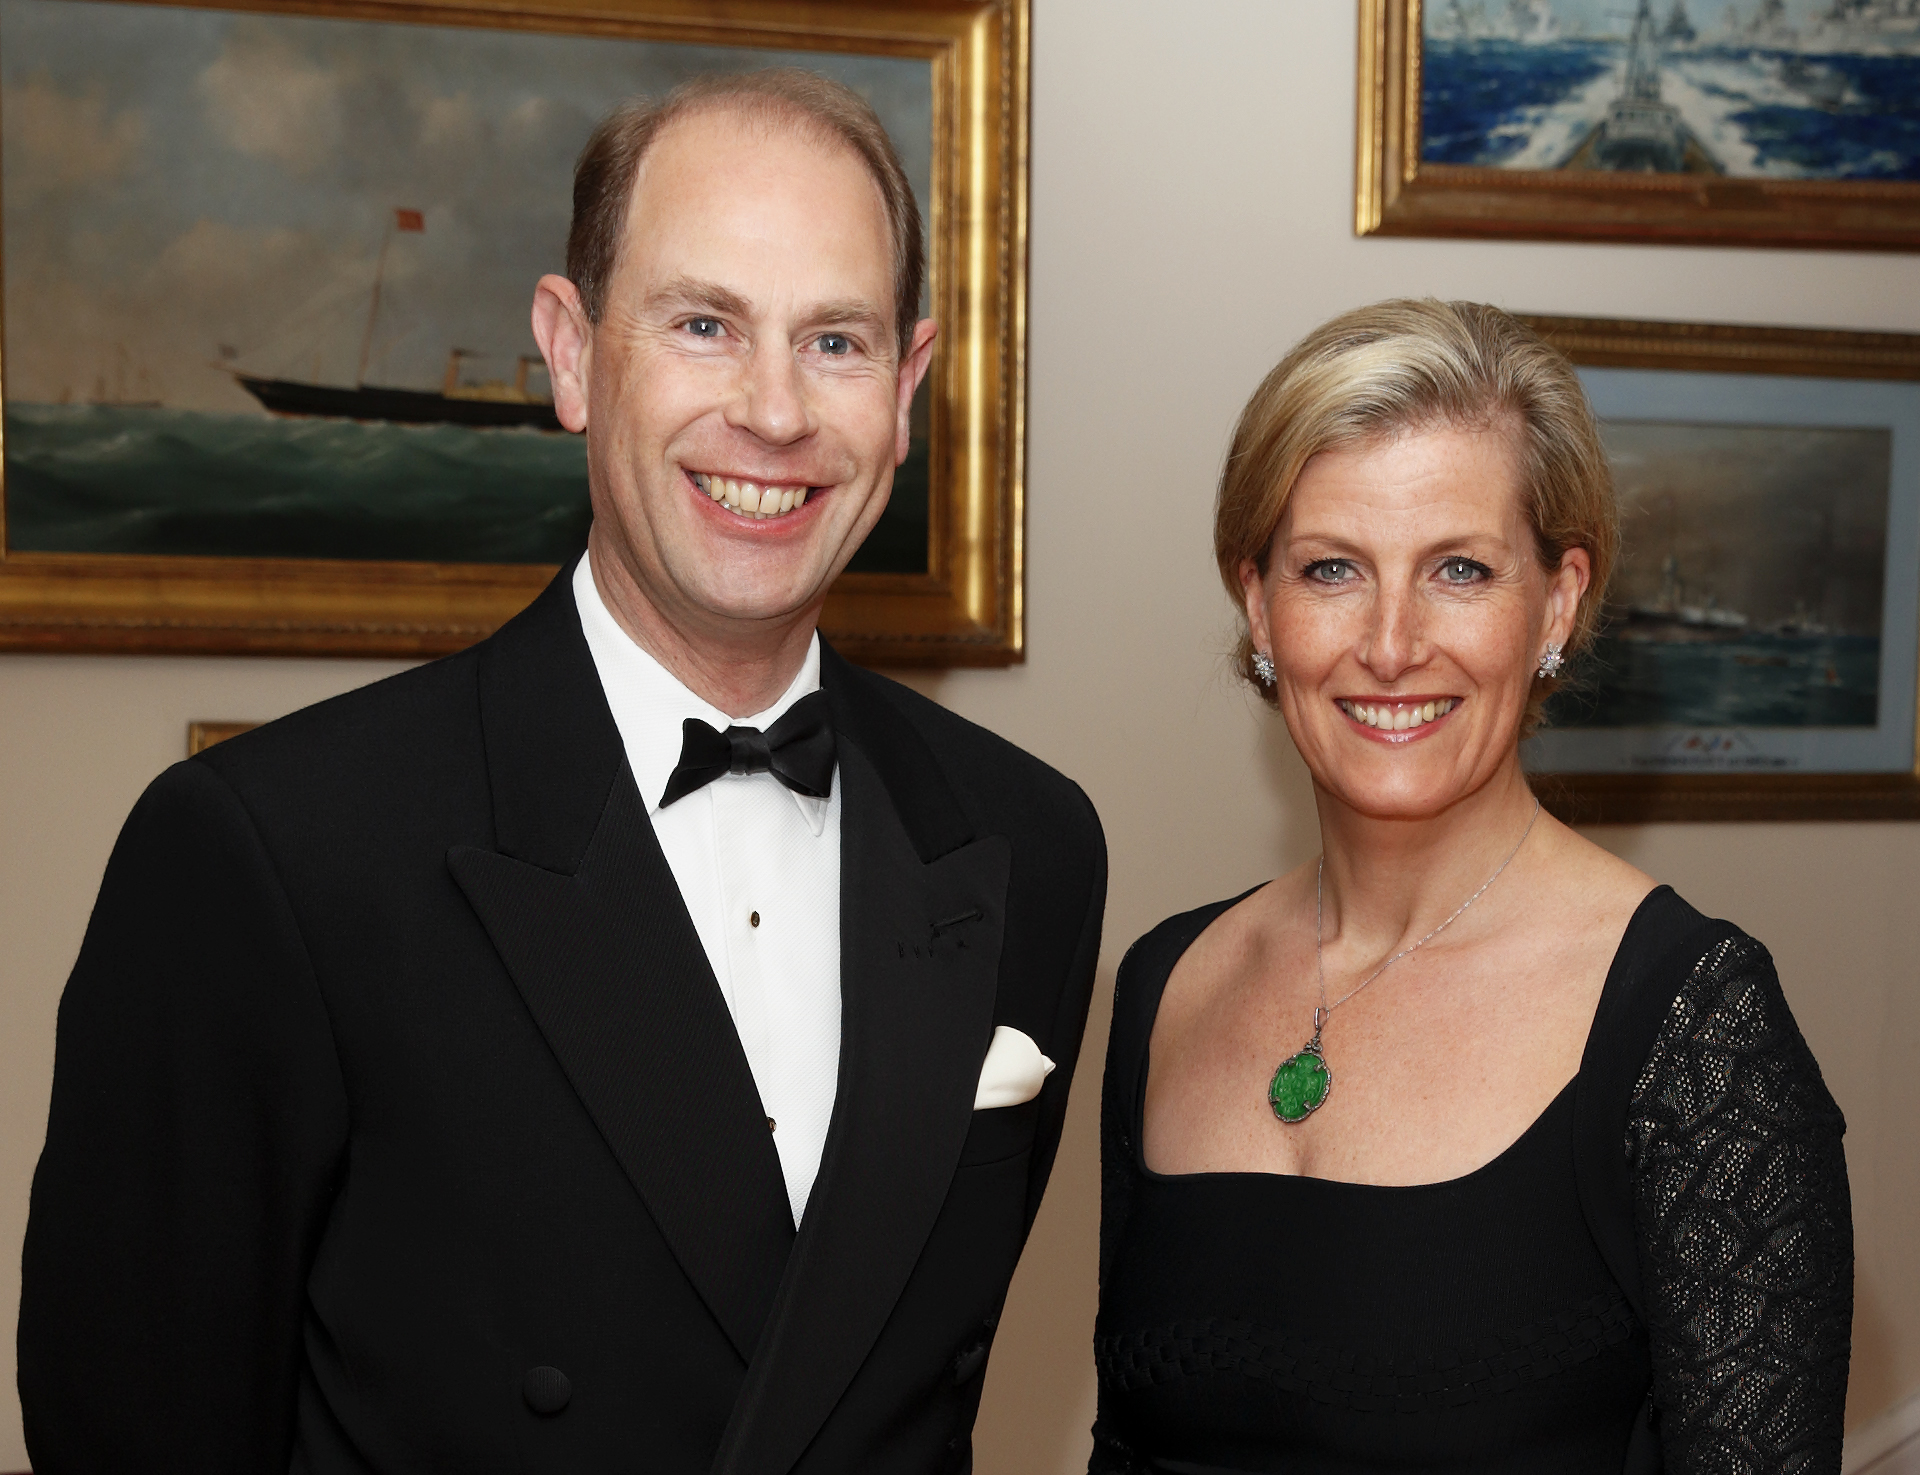 Prince Edward, Earl of Wessex and Sophie, Countess of Wessex attend a gala fundraising dinner on the Isle of Wight on March 27, 2014 in Cowes, England. (Max Mumby/Indigo—Getty Images)